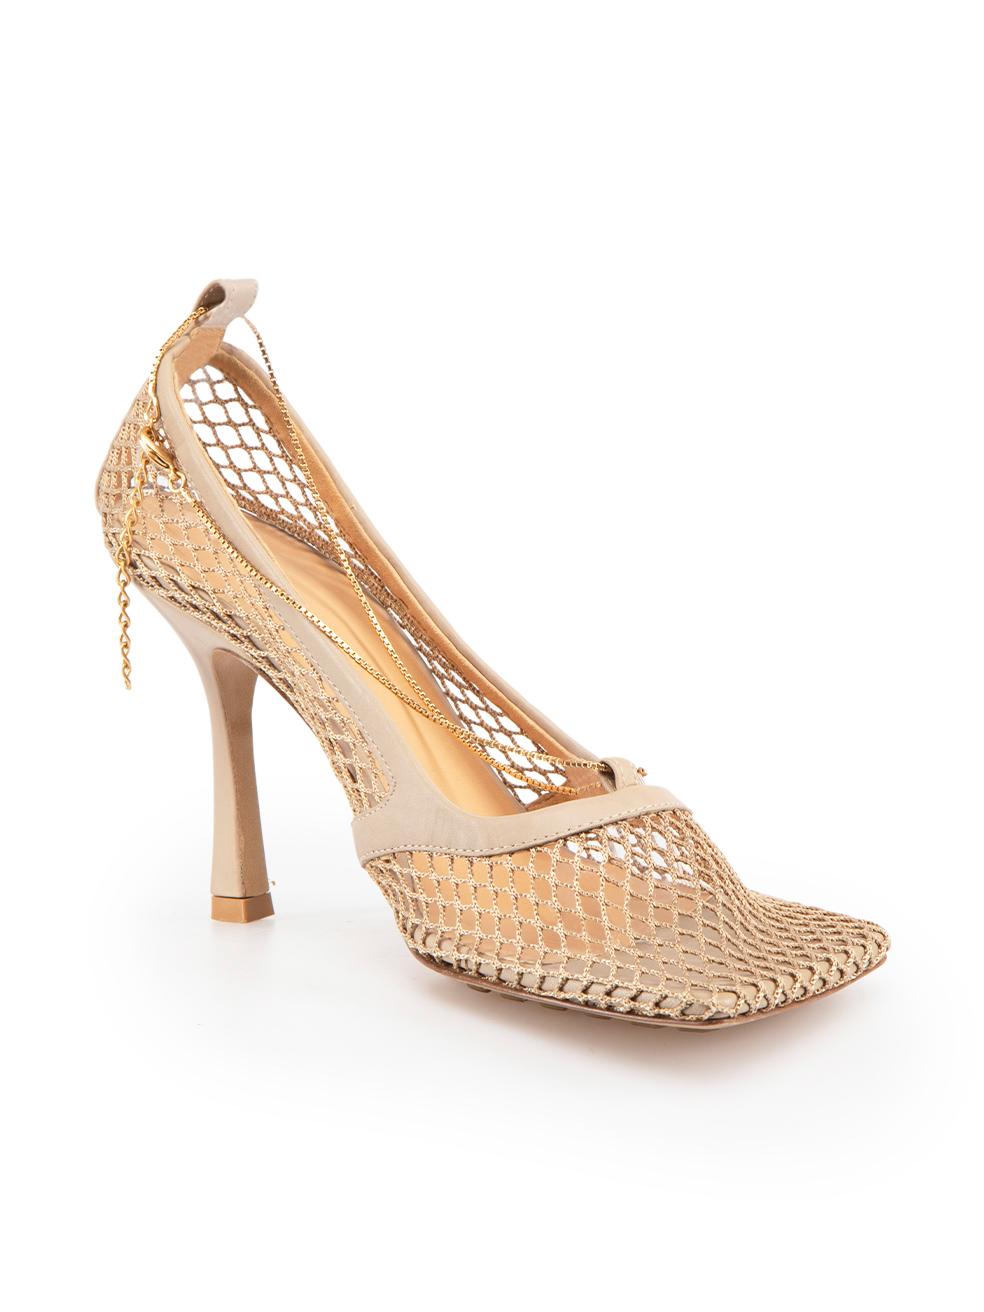 CONDITION is Very good. Minimal wear to shoes is evident. Minimal wear to the footbed with dark marks towards the heels on this used Bottega Veneta designer resale item.
 
 Details
 Stretch
 Beige
 Cloth mesh
 Sandals
 Square toe
 High heel
 Chain